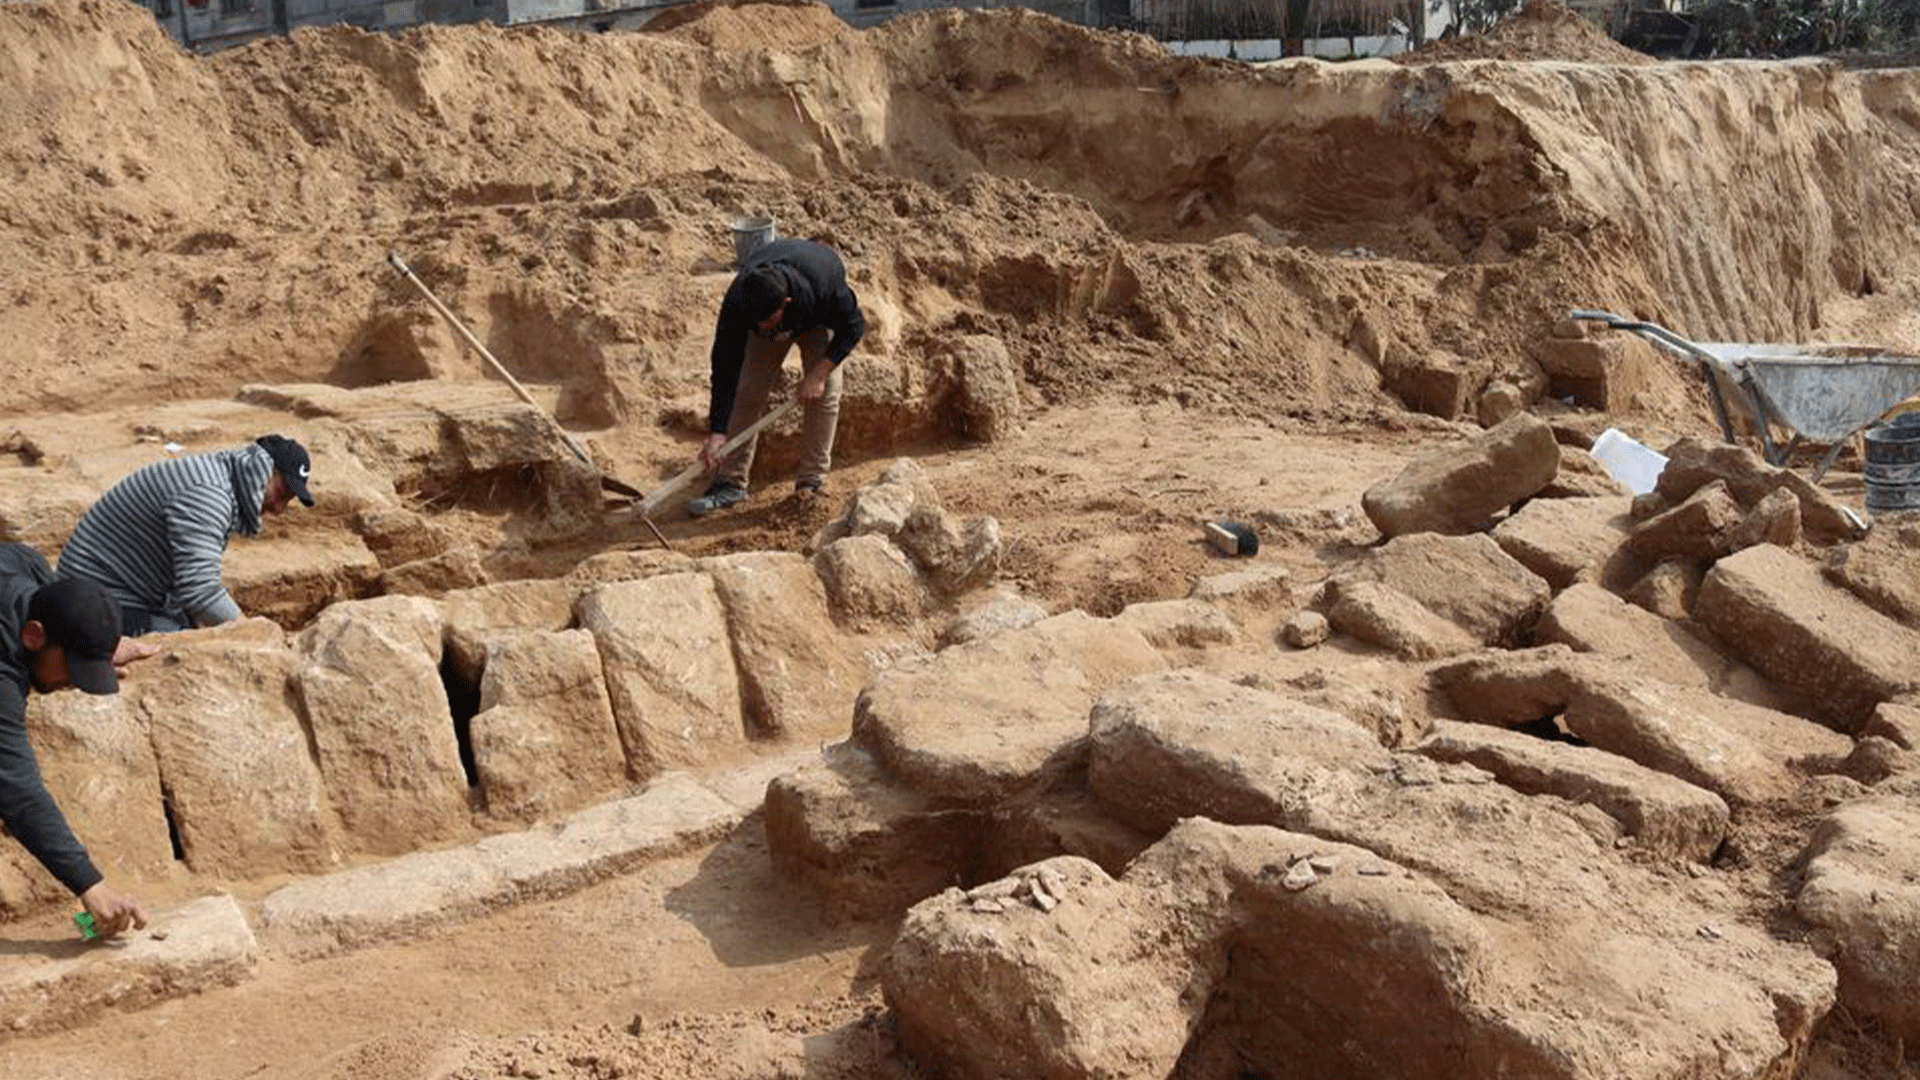  Men work in a newly discovered Roman cemetery in Gaza, in this handout photo obtained by Reuters, February 17, 2022. Ministry of Tourism and Antiquities/Handout via REUTERS